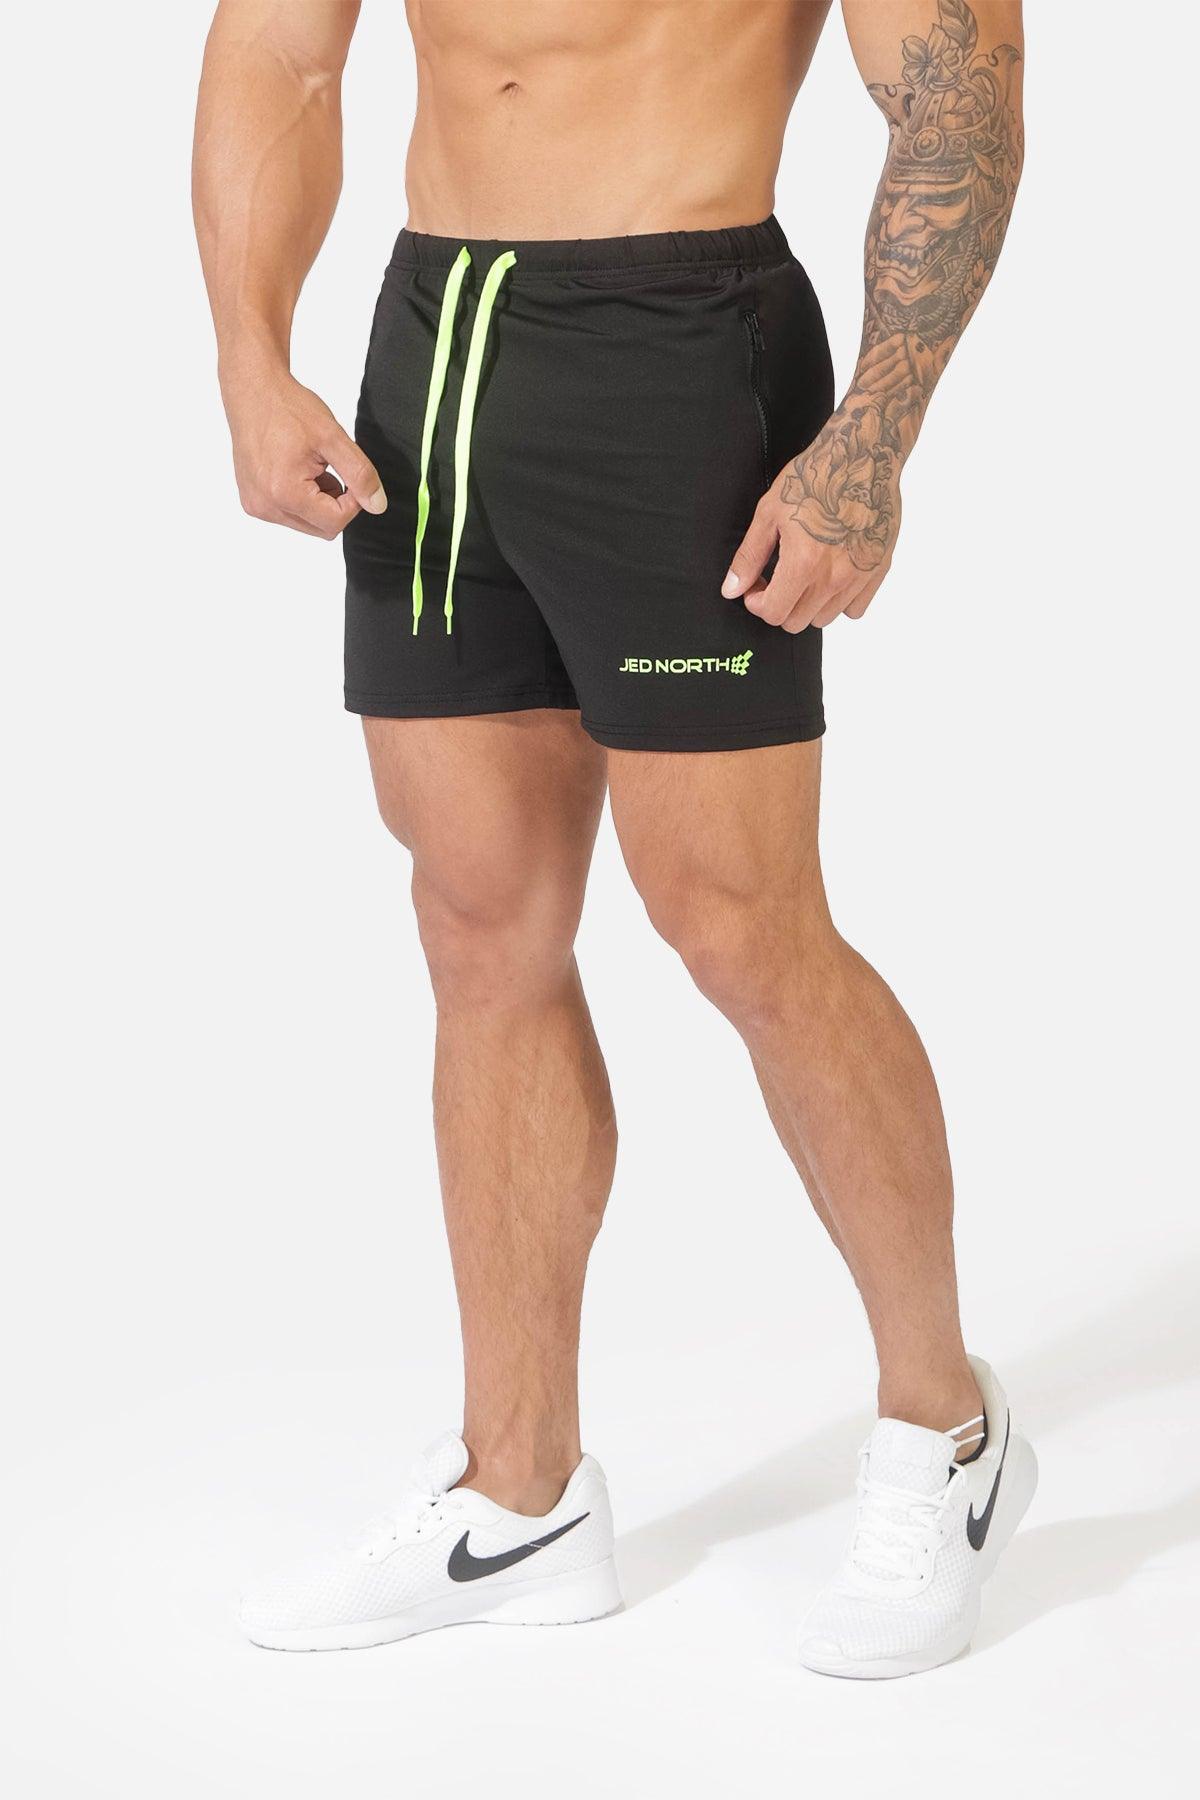 Jed North Men's 4 Fitted Shorts Bodybuilding Workout Gym Running